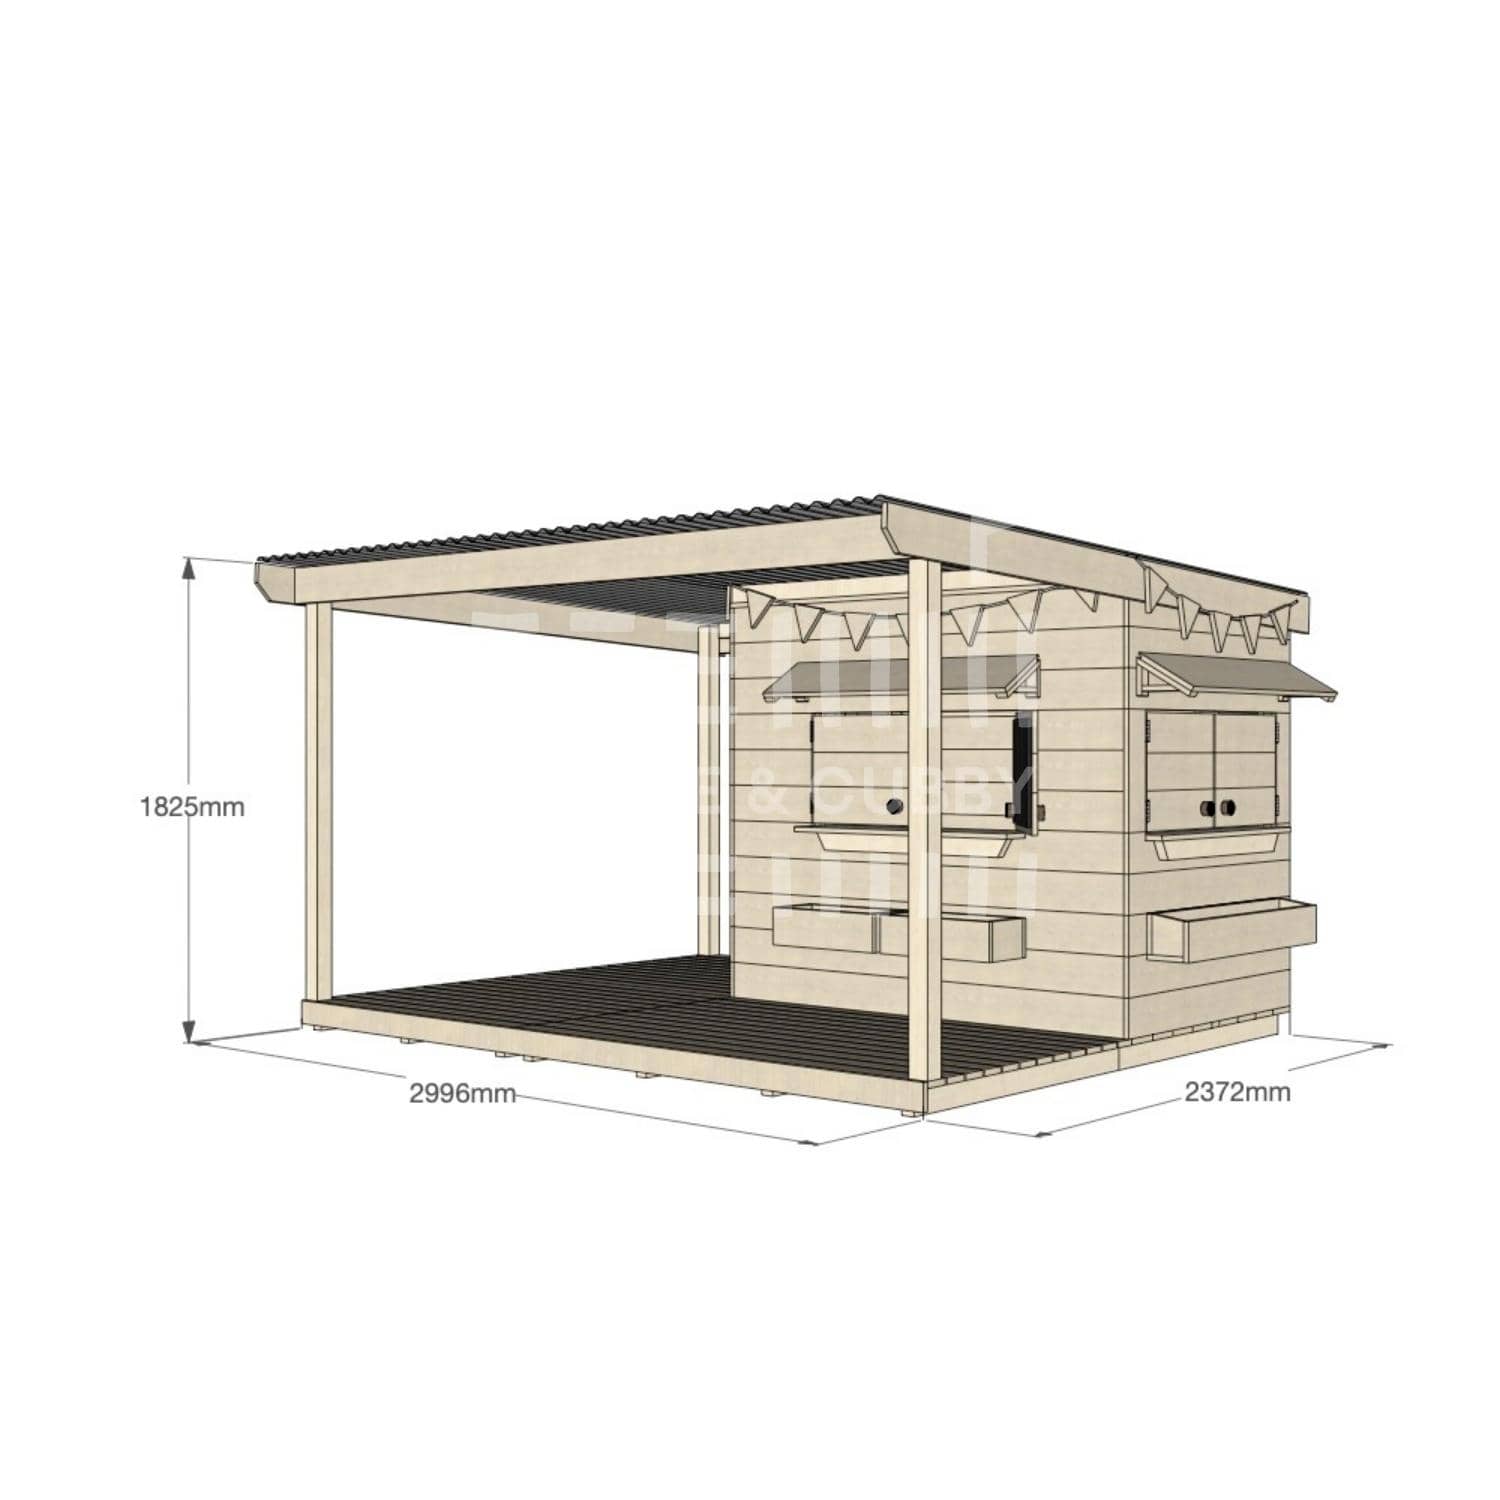 Raw pine cubby house with wraparound verandah for residential backyards little rectangle size with dimensions